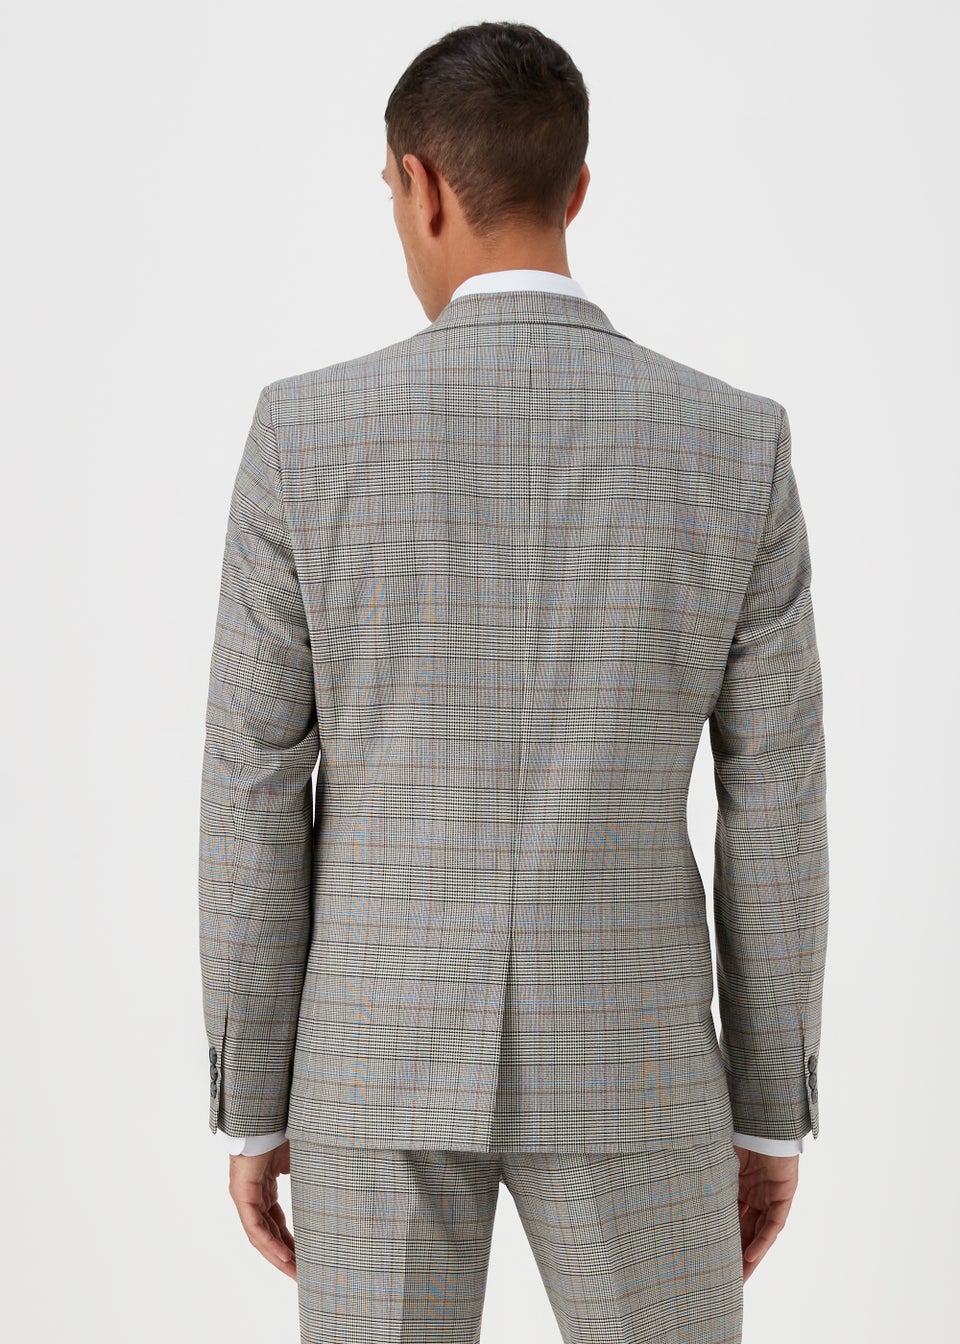 Taylor & Wright Stone Check Slim Fit Suit Jacket